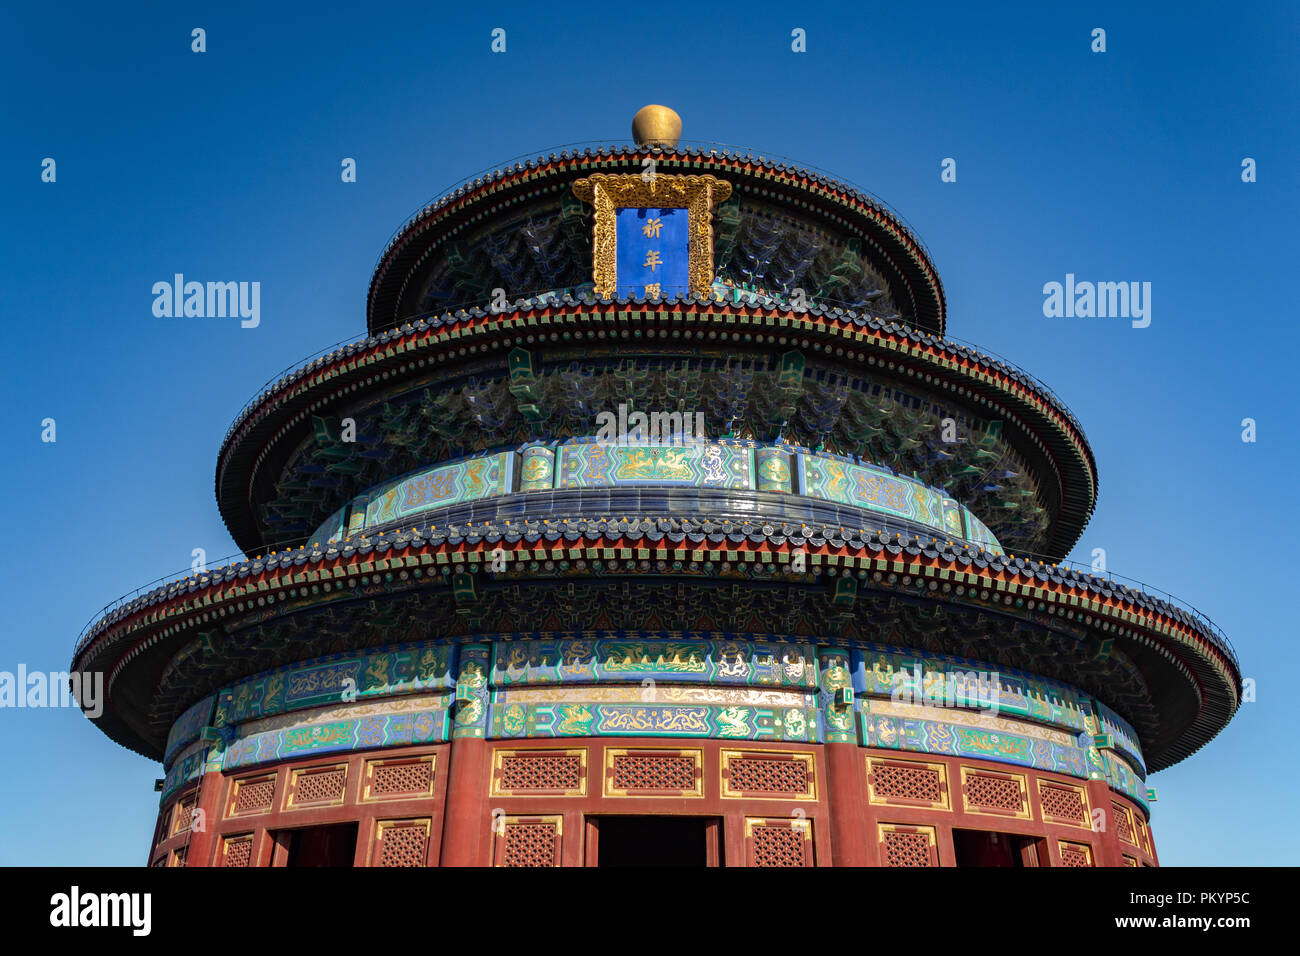 BEIJING, CHINA - DEC 10, 2017: Temple of Heaven of Beijing at daytime with blue sky tight shot Stock Photo